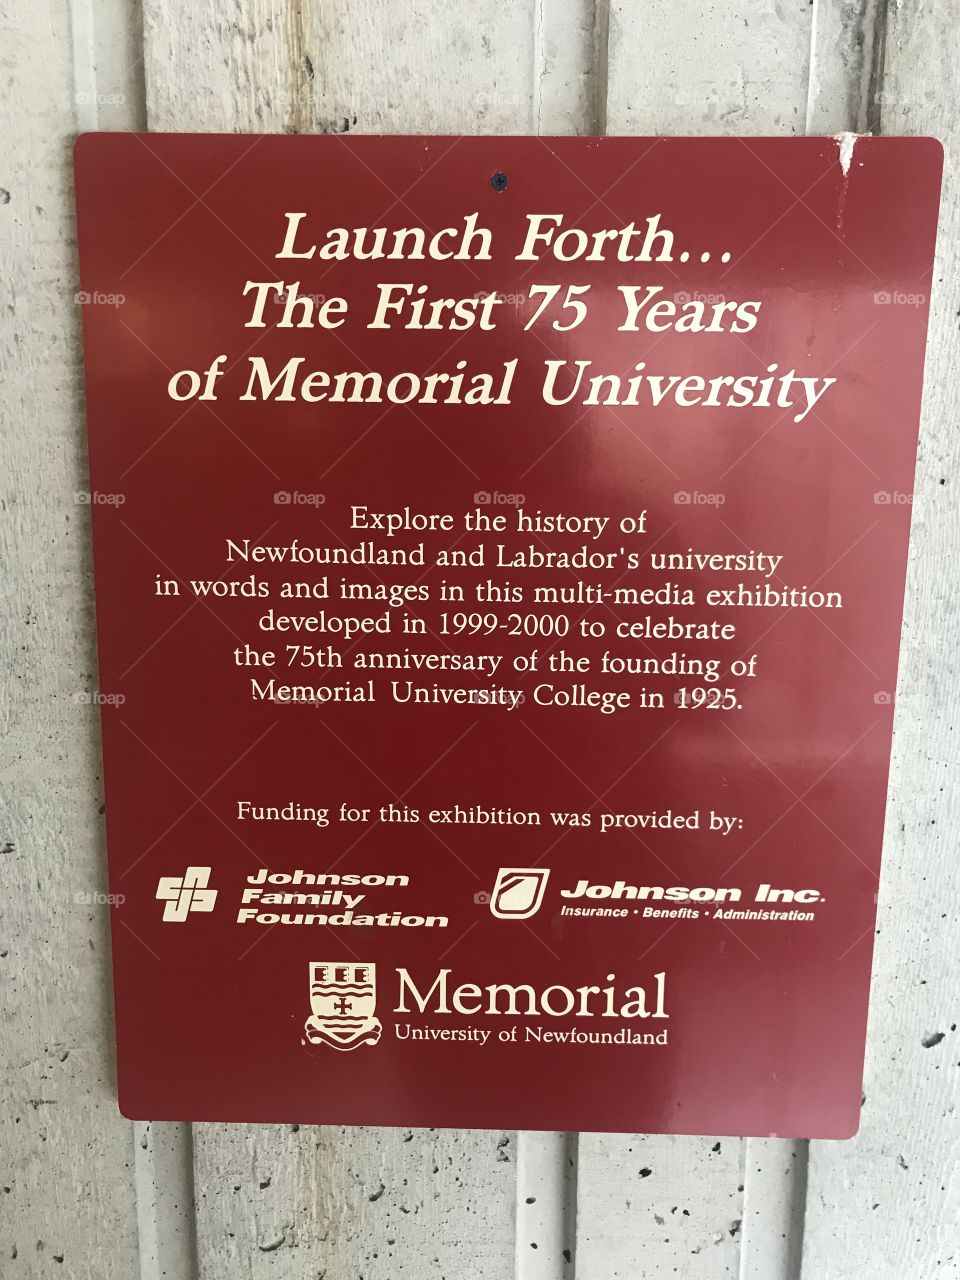 A plaque dedicating a historical display about the history of “the Newfoundland university”, which began as a college dedicated to those who died in world war 1, but was upgraded to a university in 1949. This was done in honour of WW2 war dead in NL